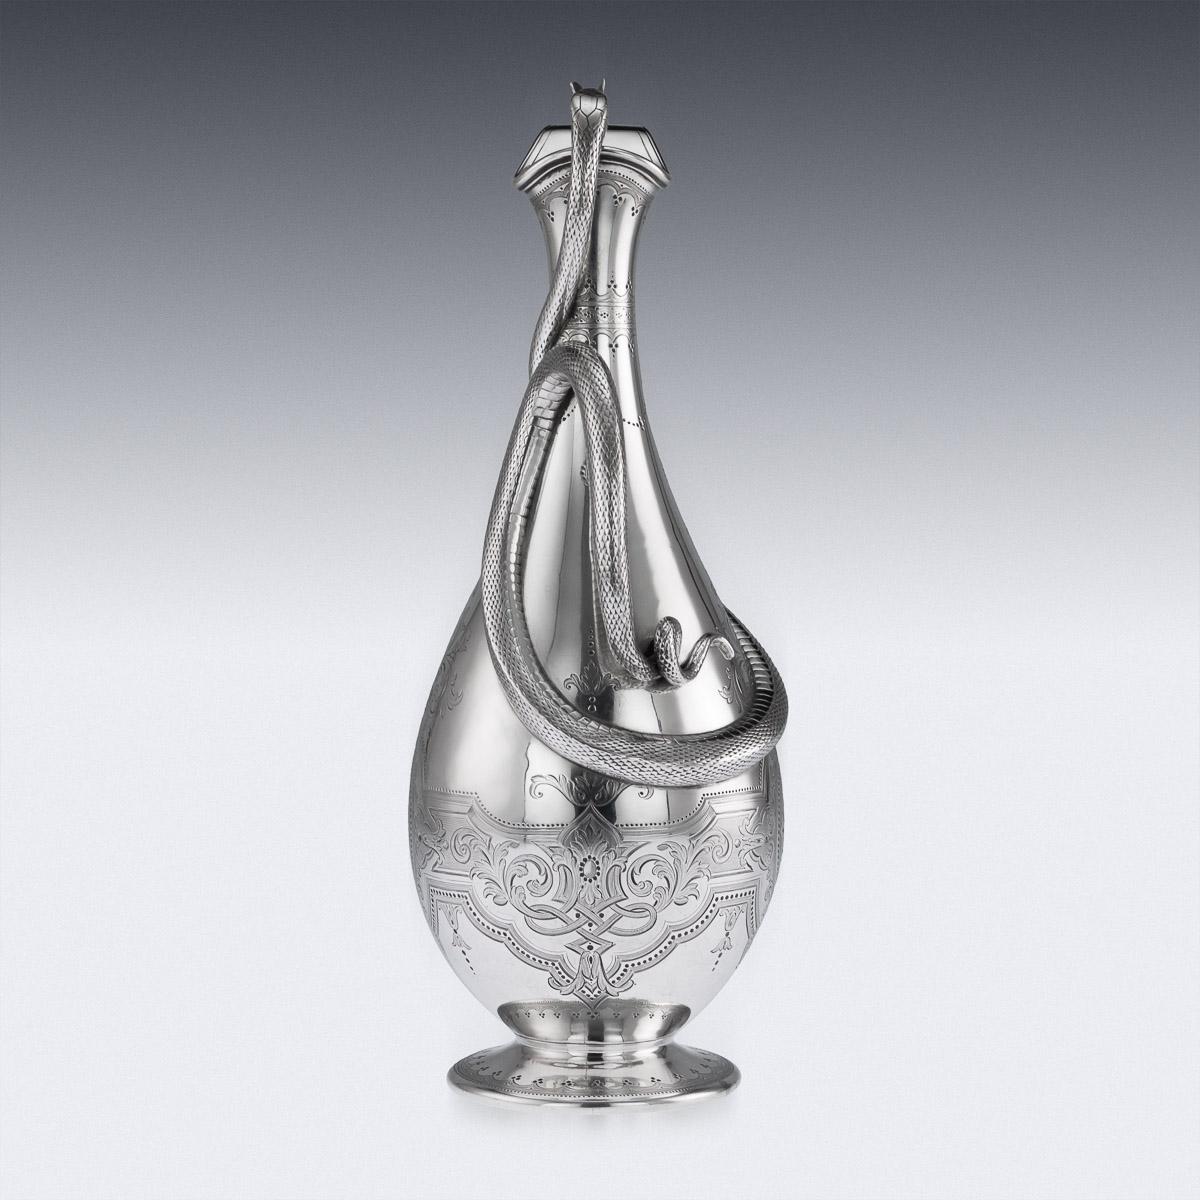 Antique mid-19th century Victorian solid silver magnificent wine jug, very large, baluster form, the body engraved with foliate strapwork and applied with an entwined snake handle, the hinged cover applied with a butterfly, the front engraved with a